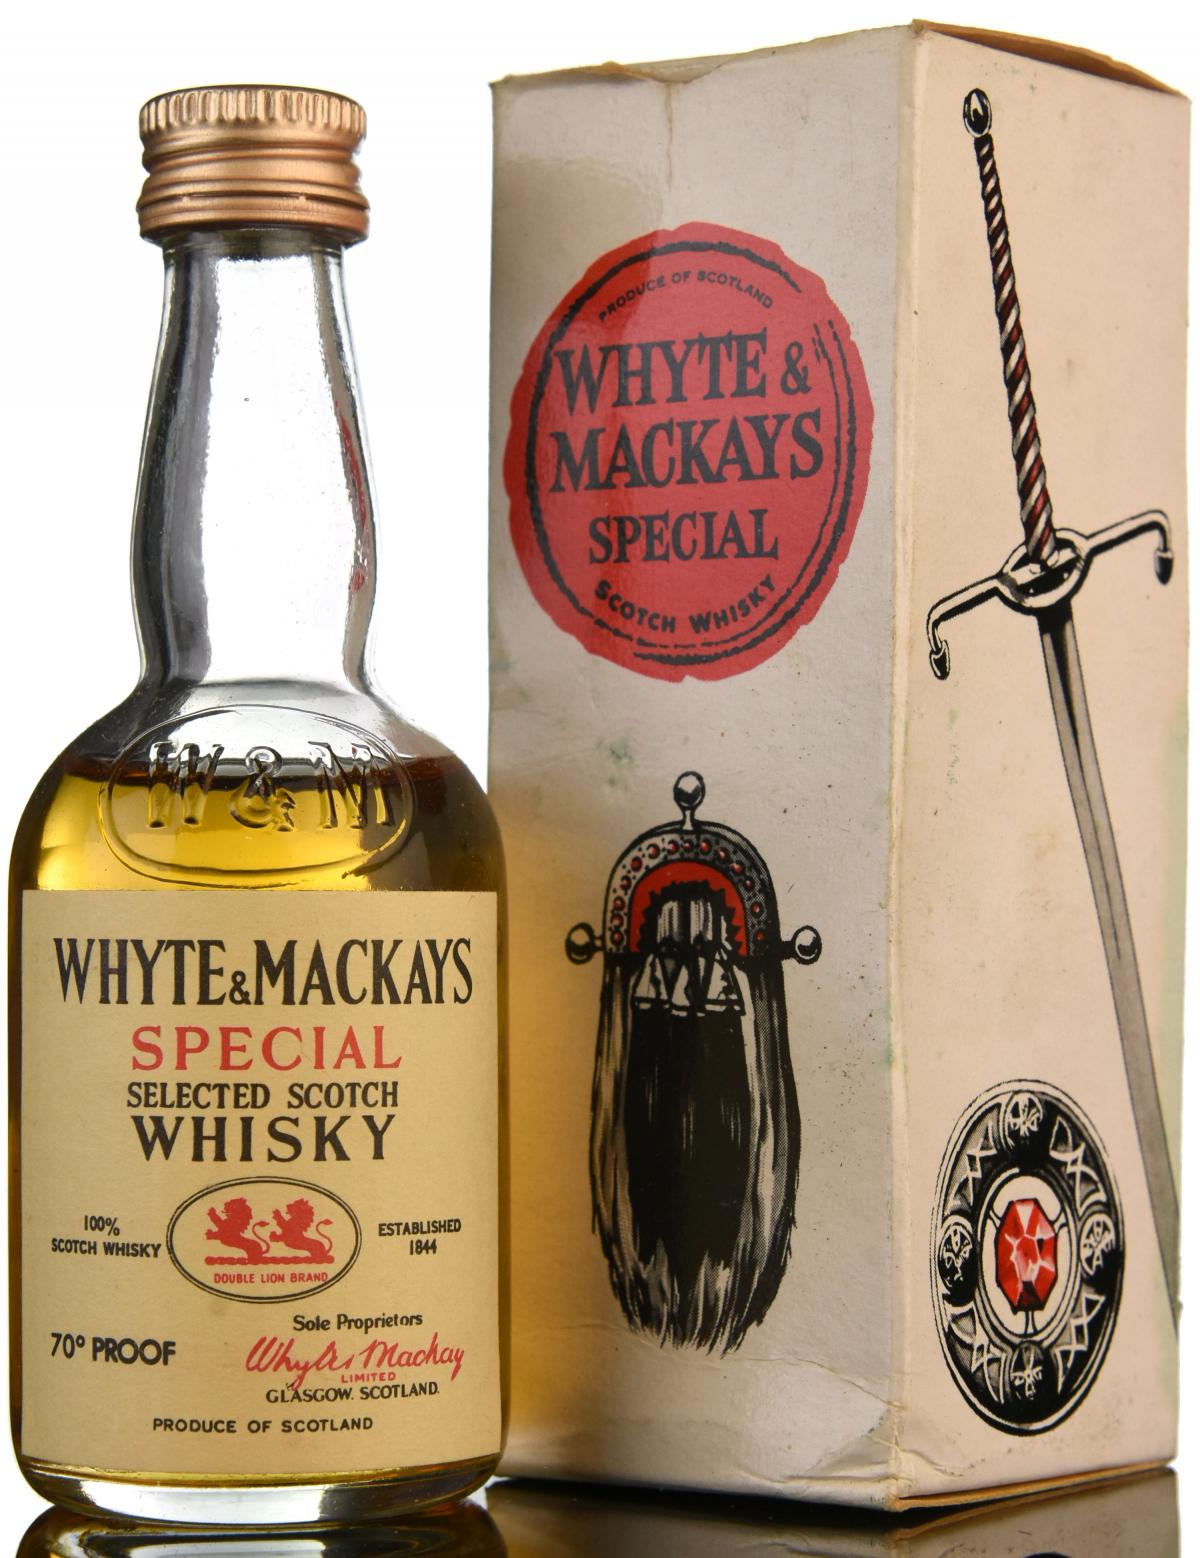 Whyte & Mackays Special Miniature